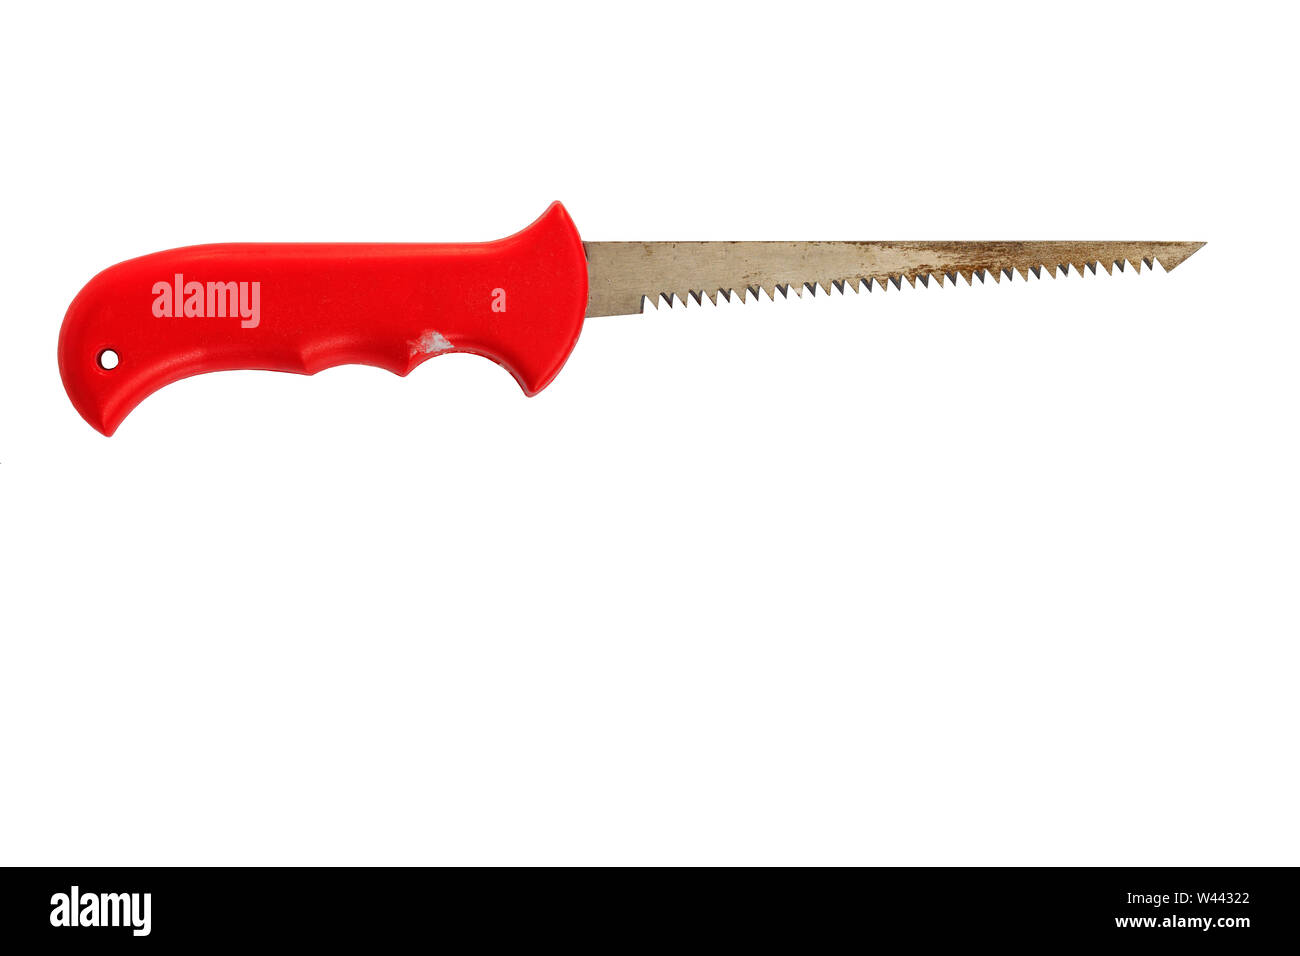 Manual narrow old saw for wood and pruning with a sharp end and a red plastic handle isolated on a white background. Stock Photo